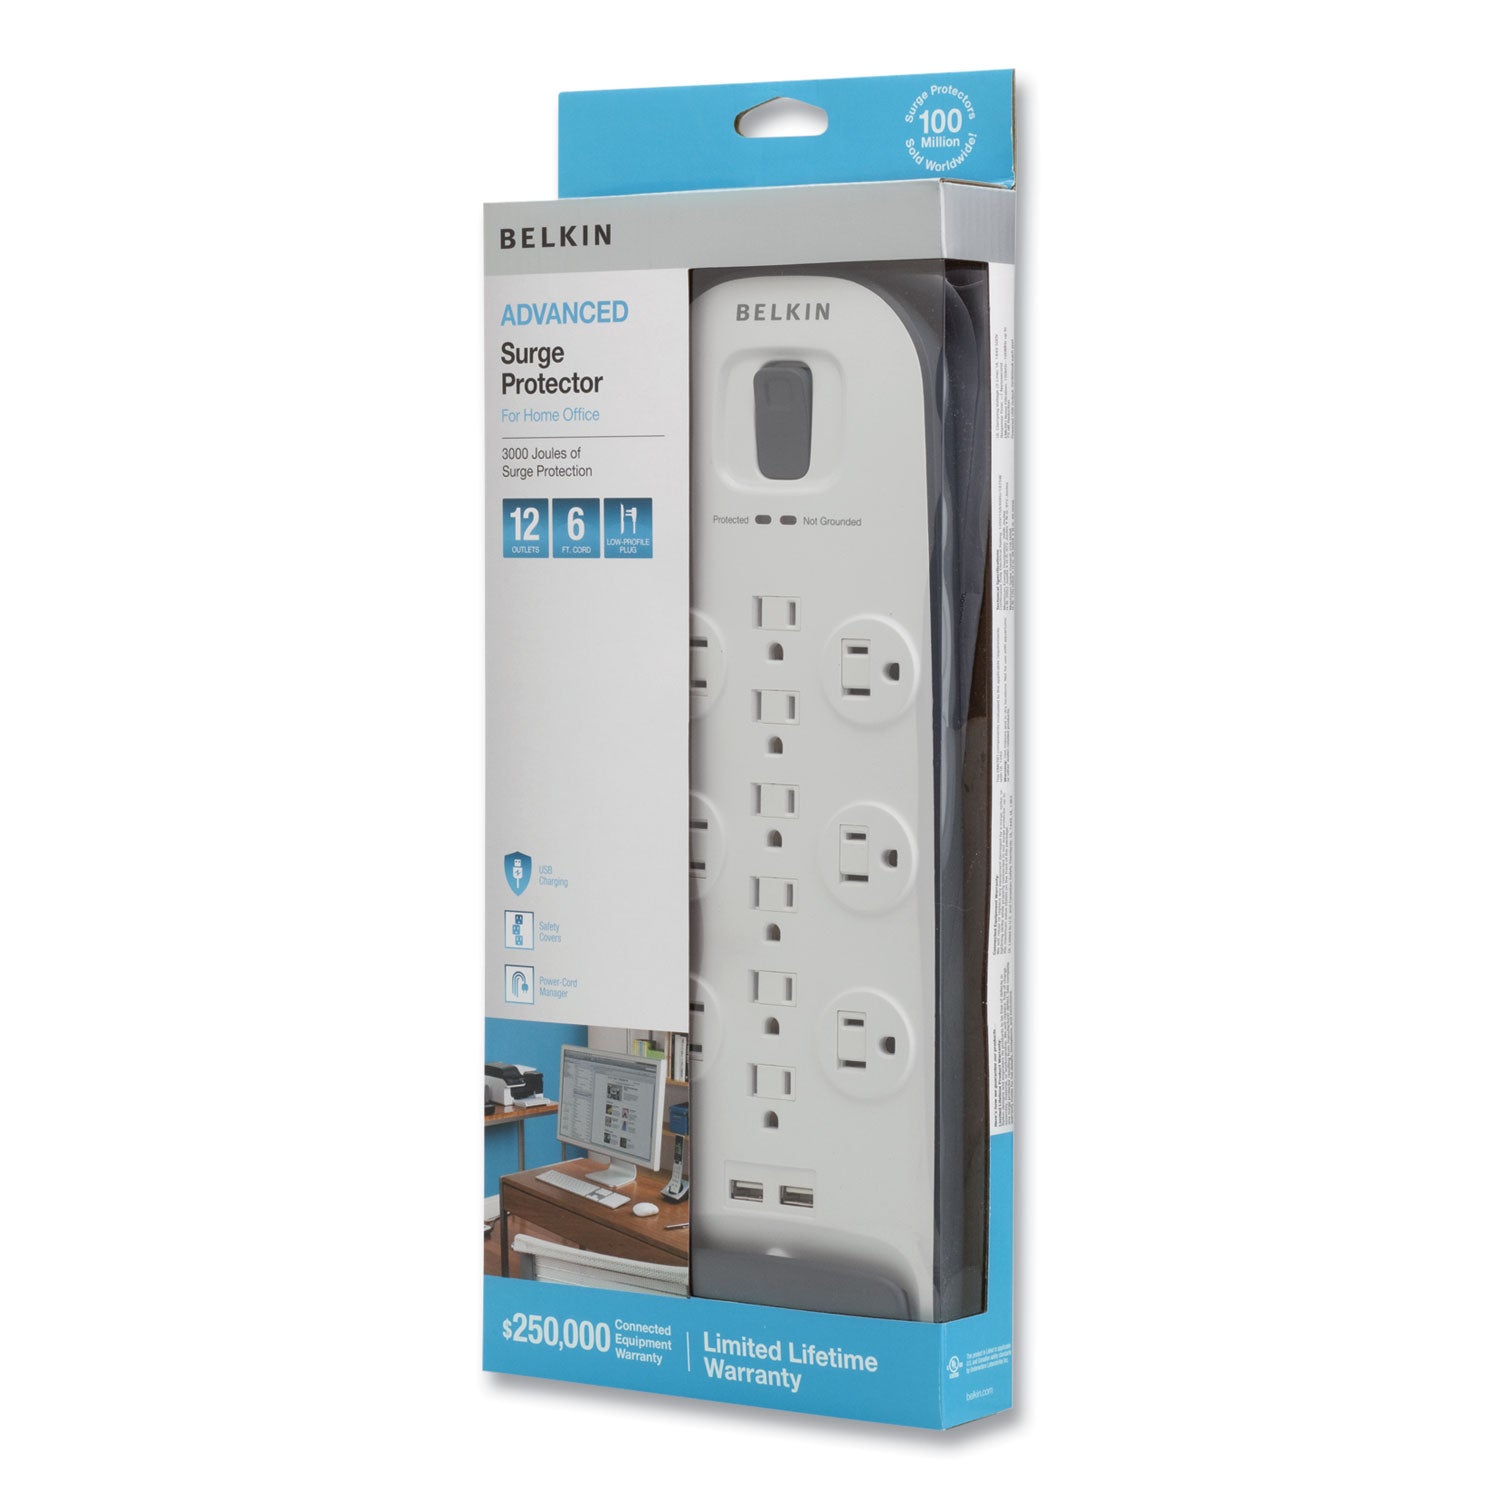 Home/Office Surge Protector, 12 AC Outlets, 6 ft Cord, 3,996 J, White/Black - 